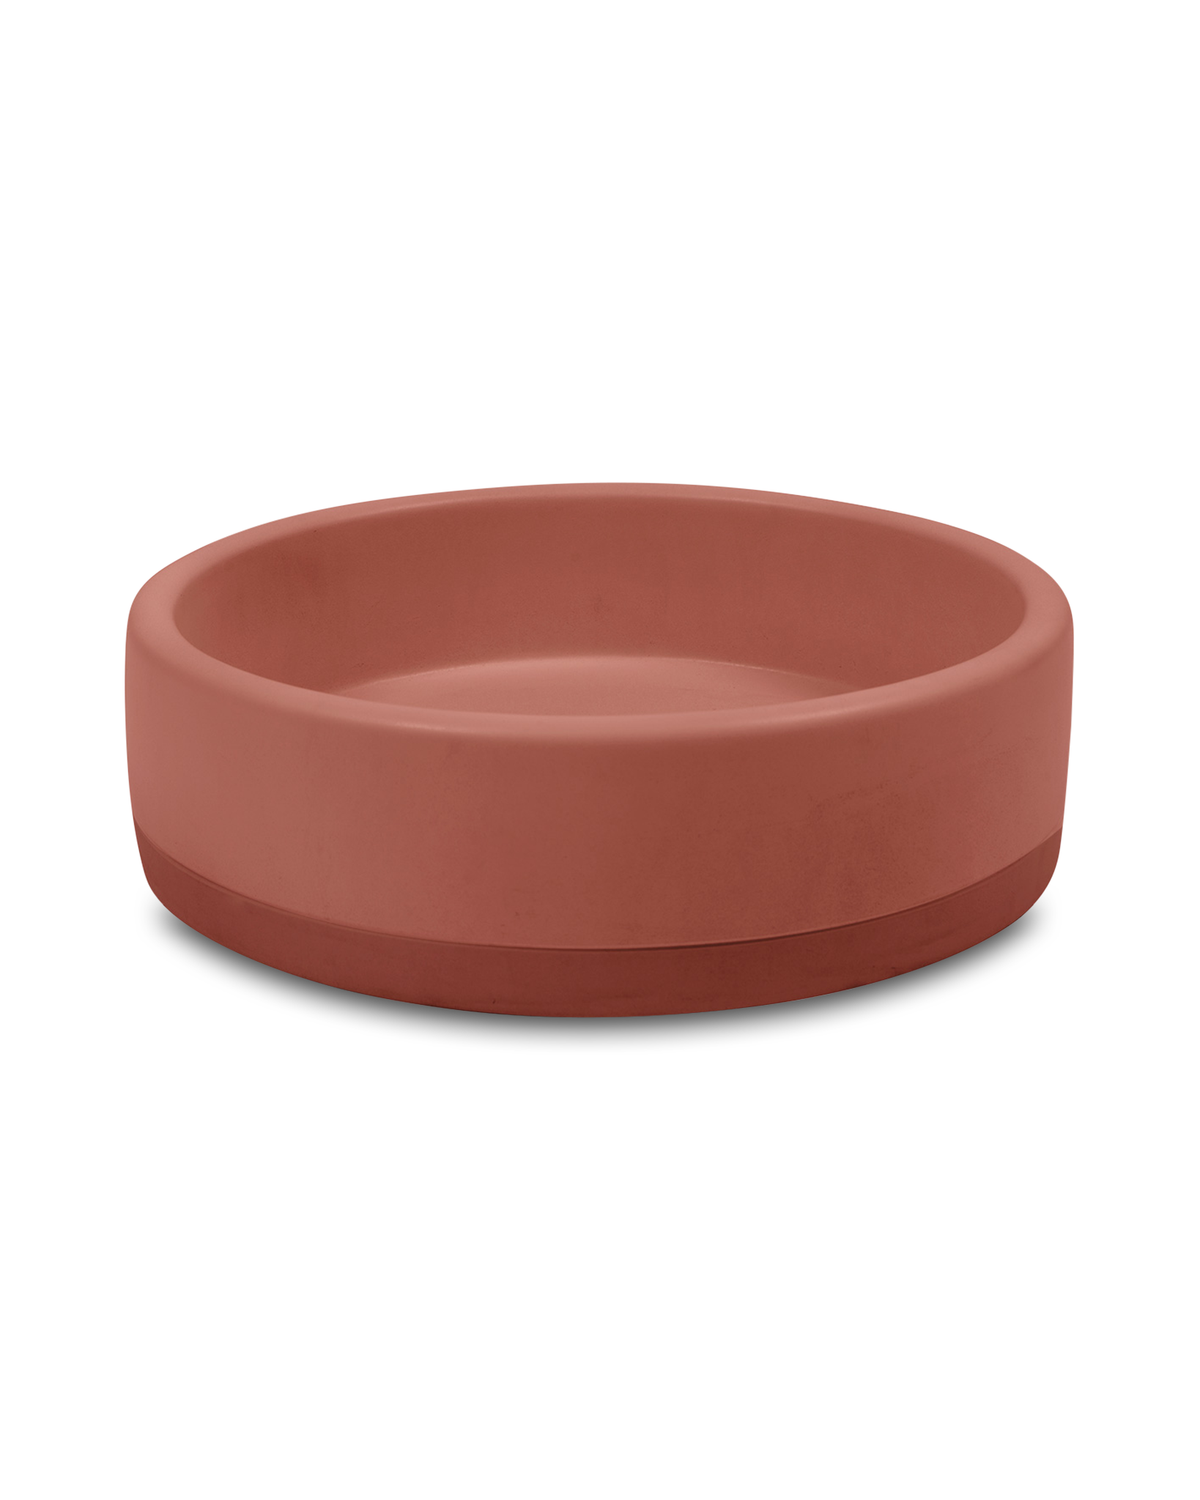 Bowl Basin Two Tone - Surface Mount (Musk)